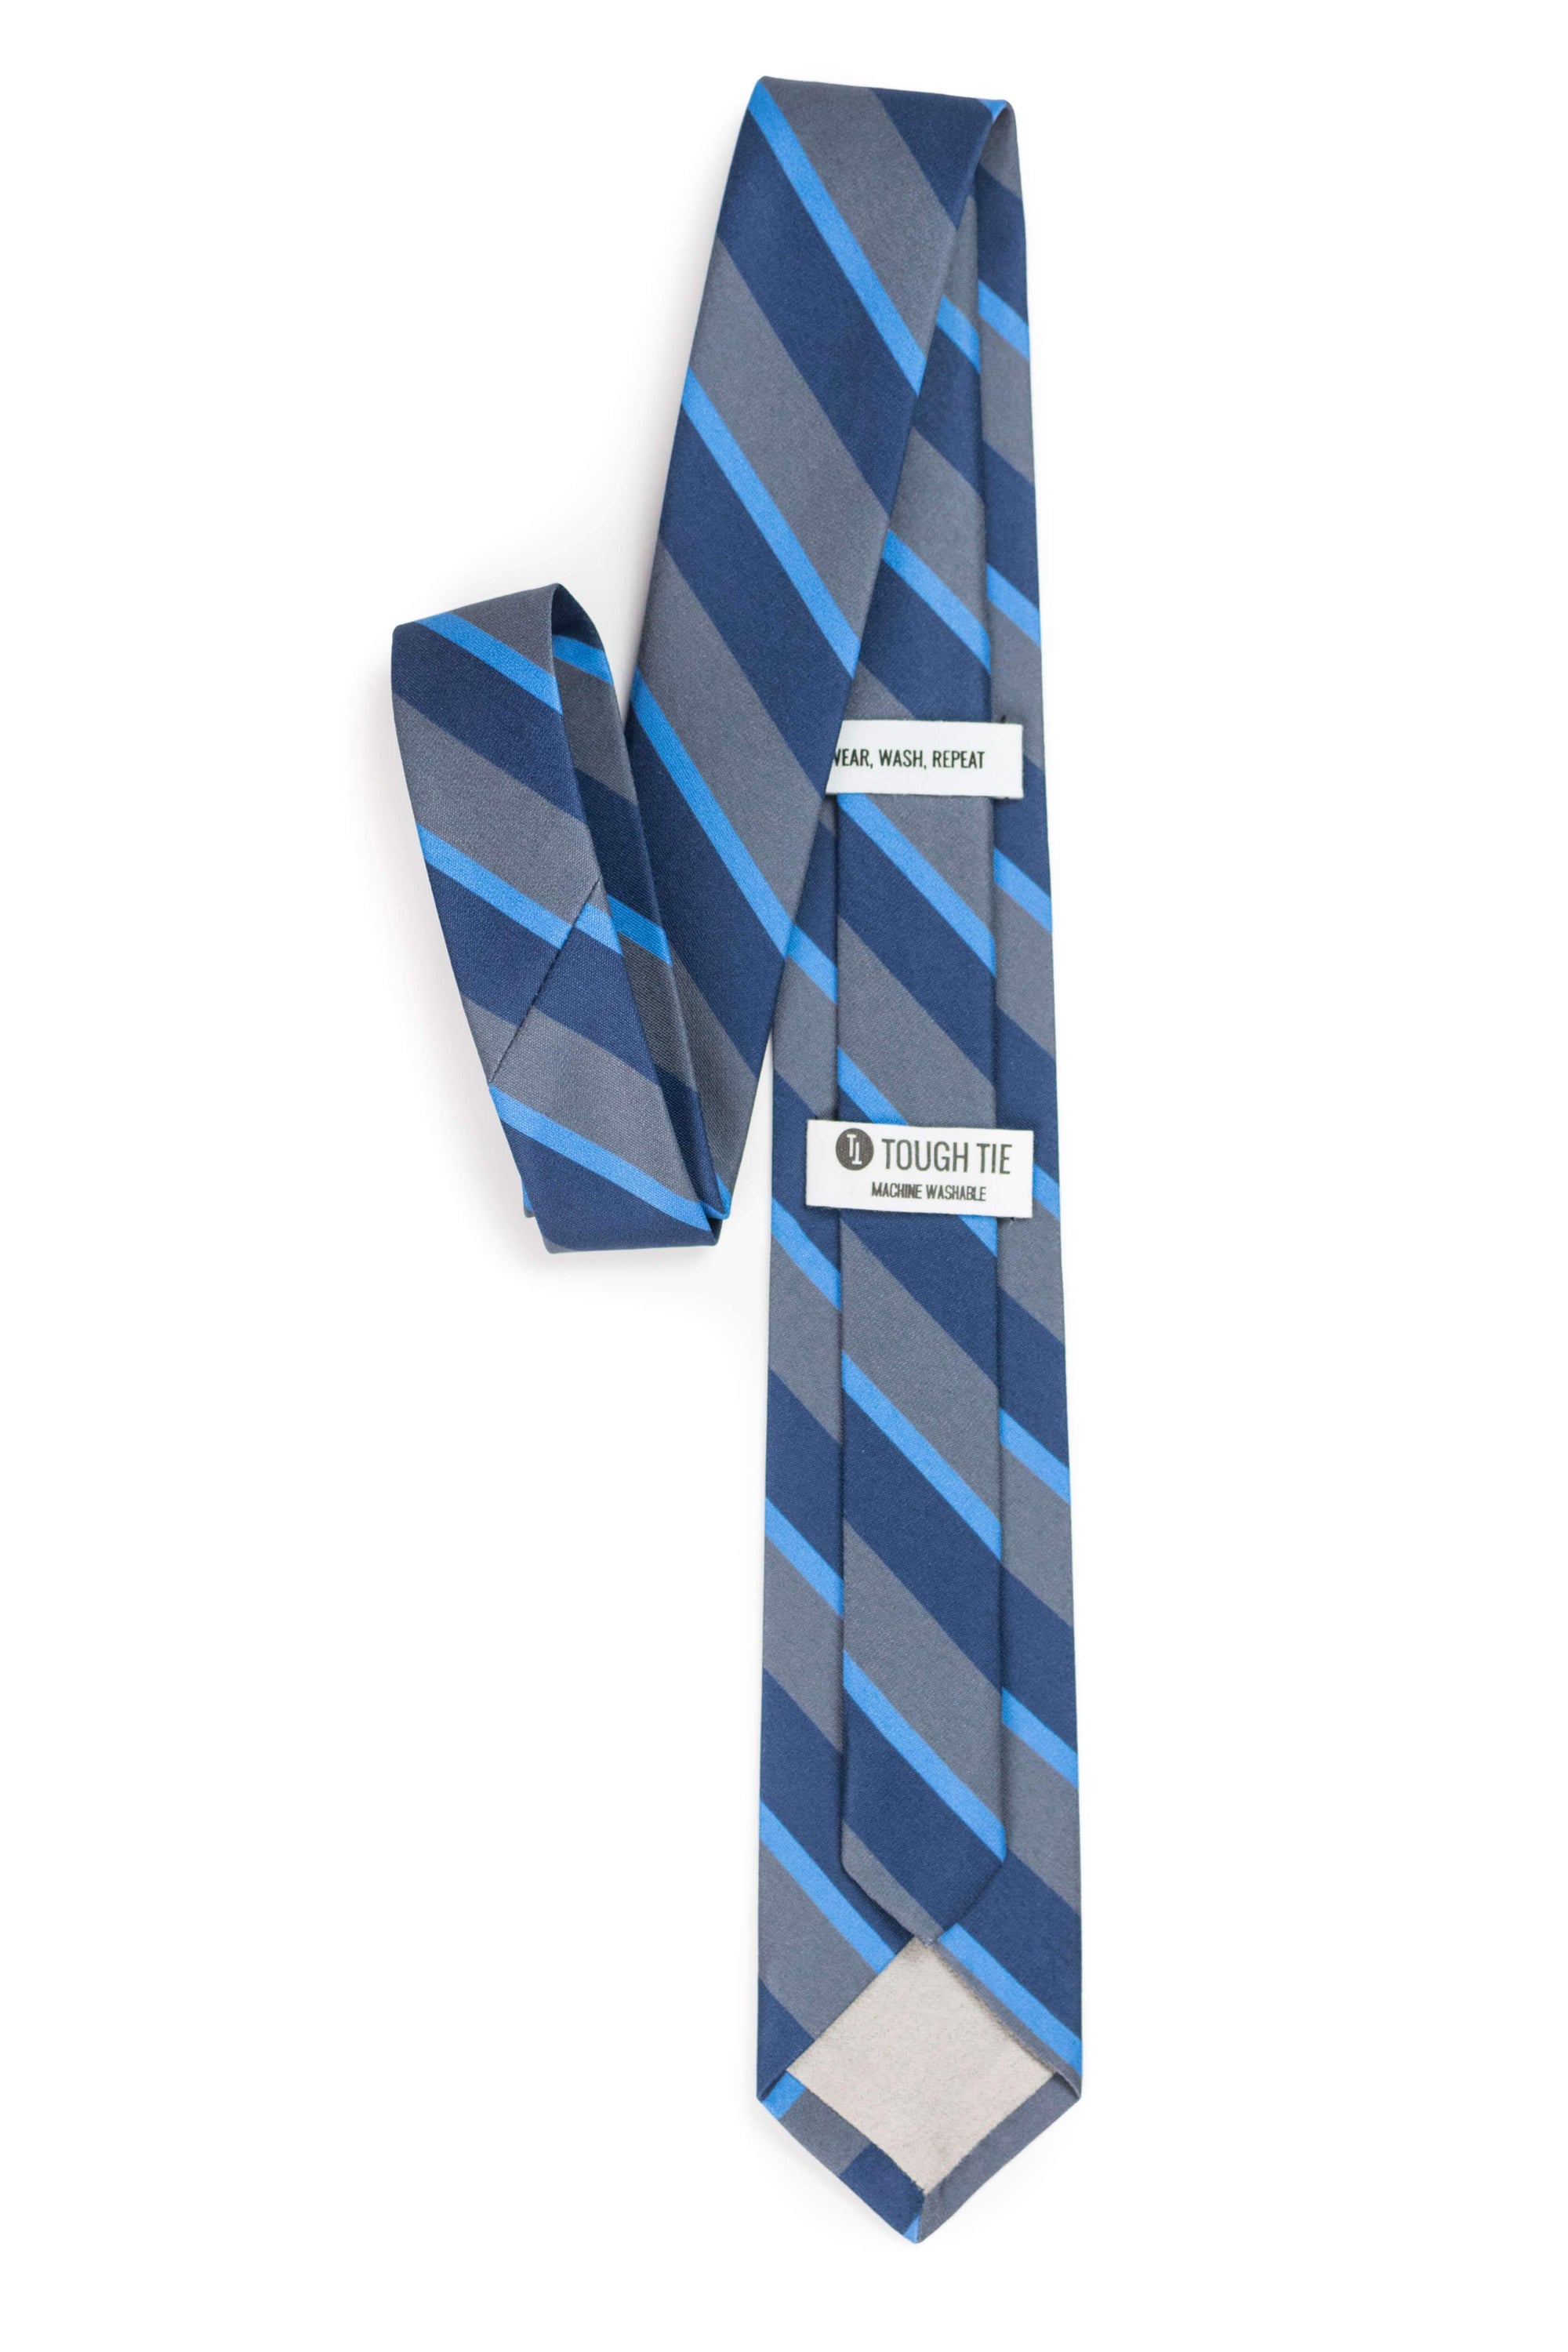 grey and navy striped tie front view